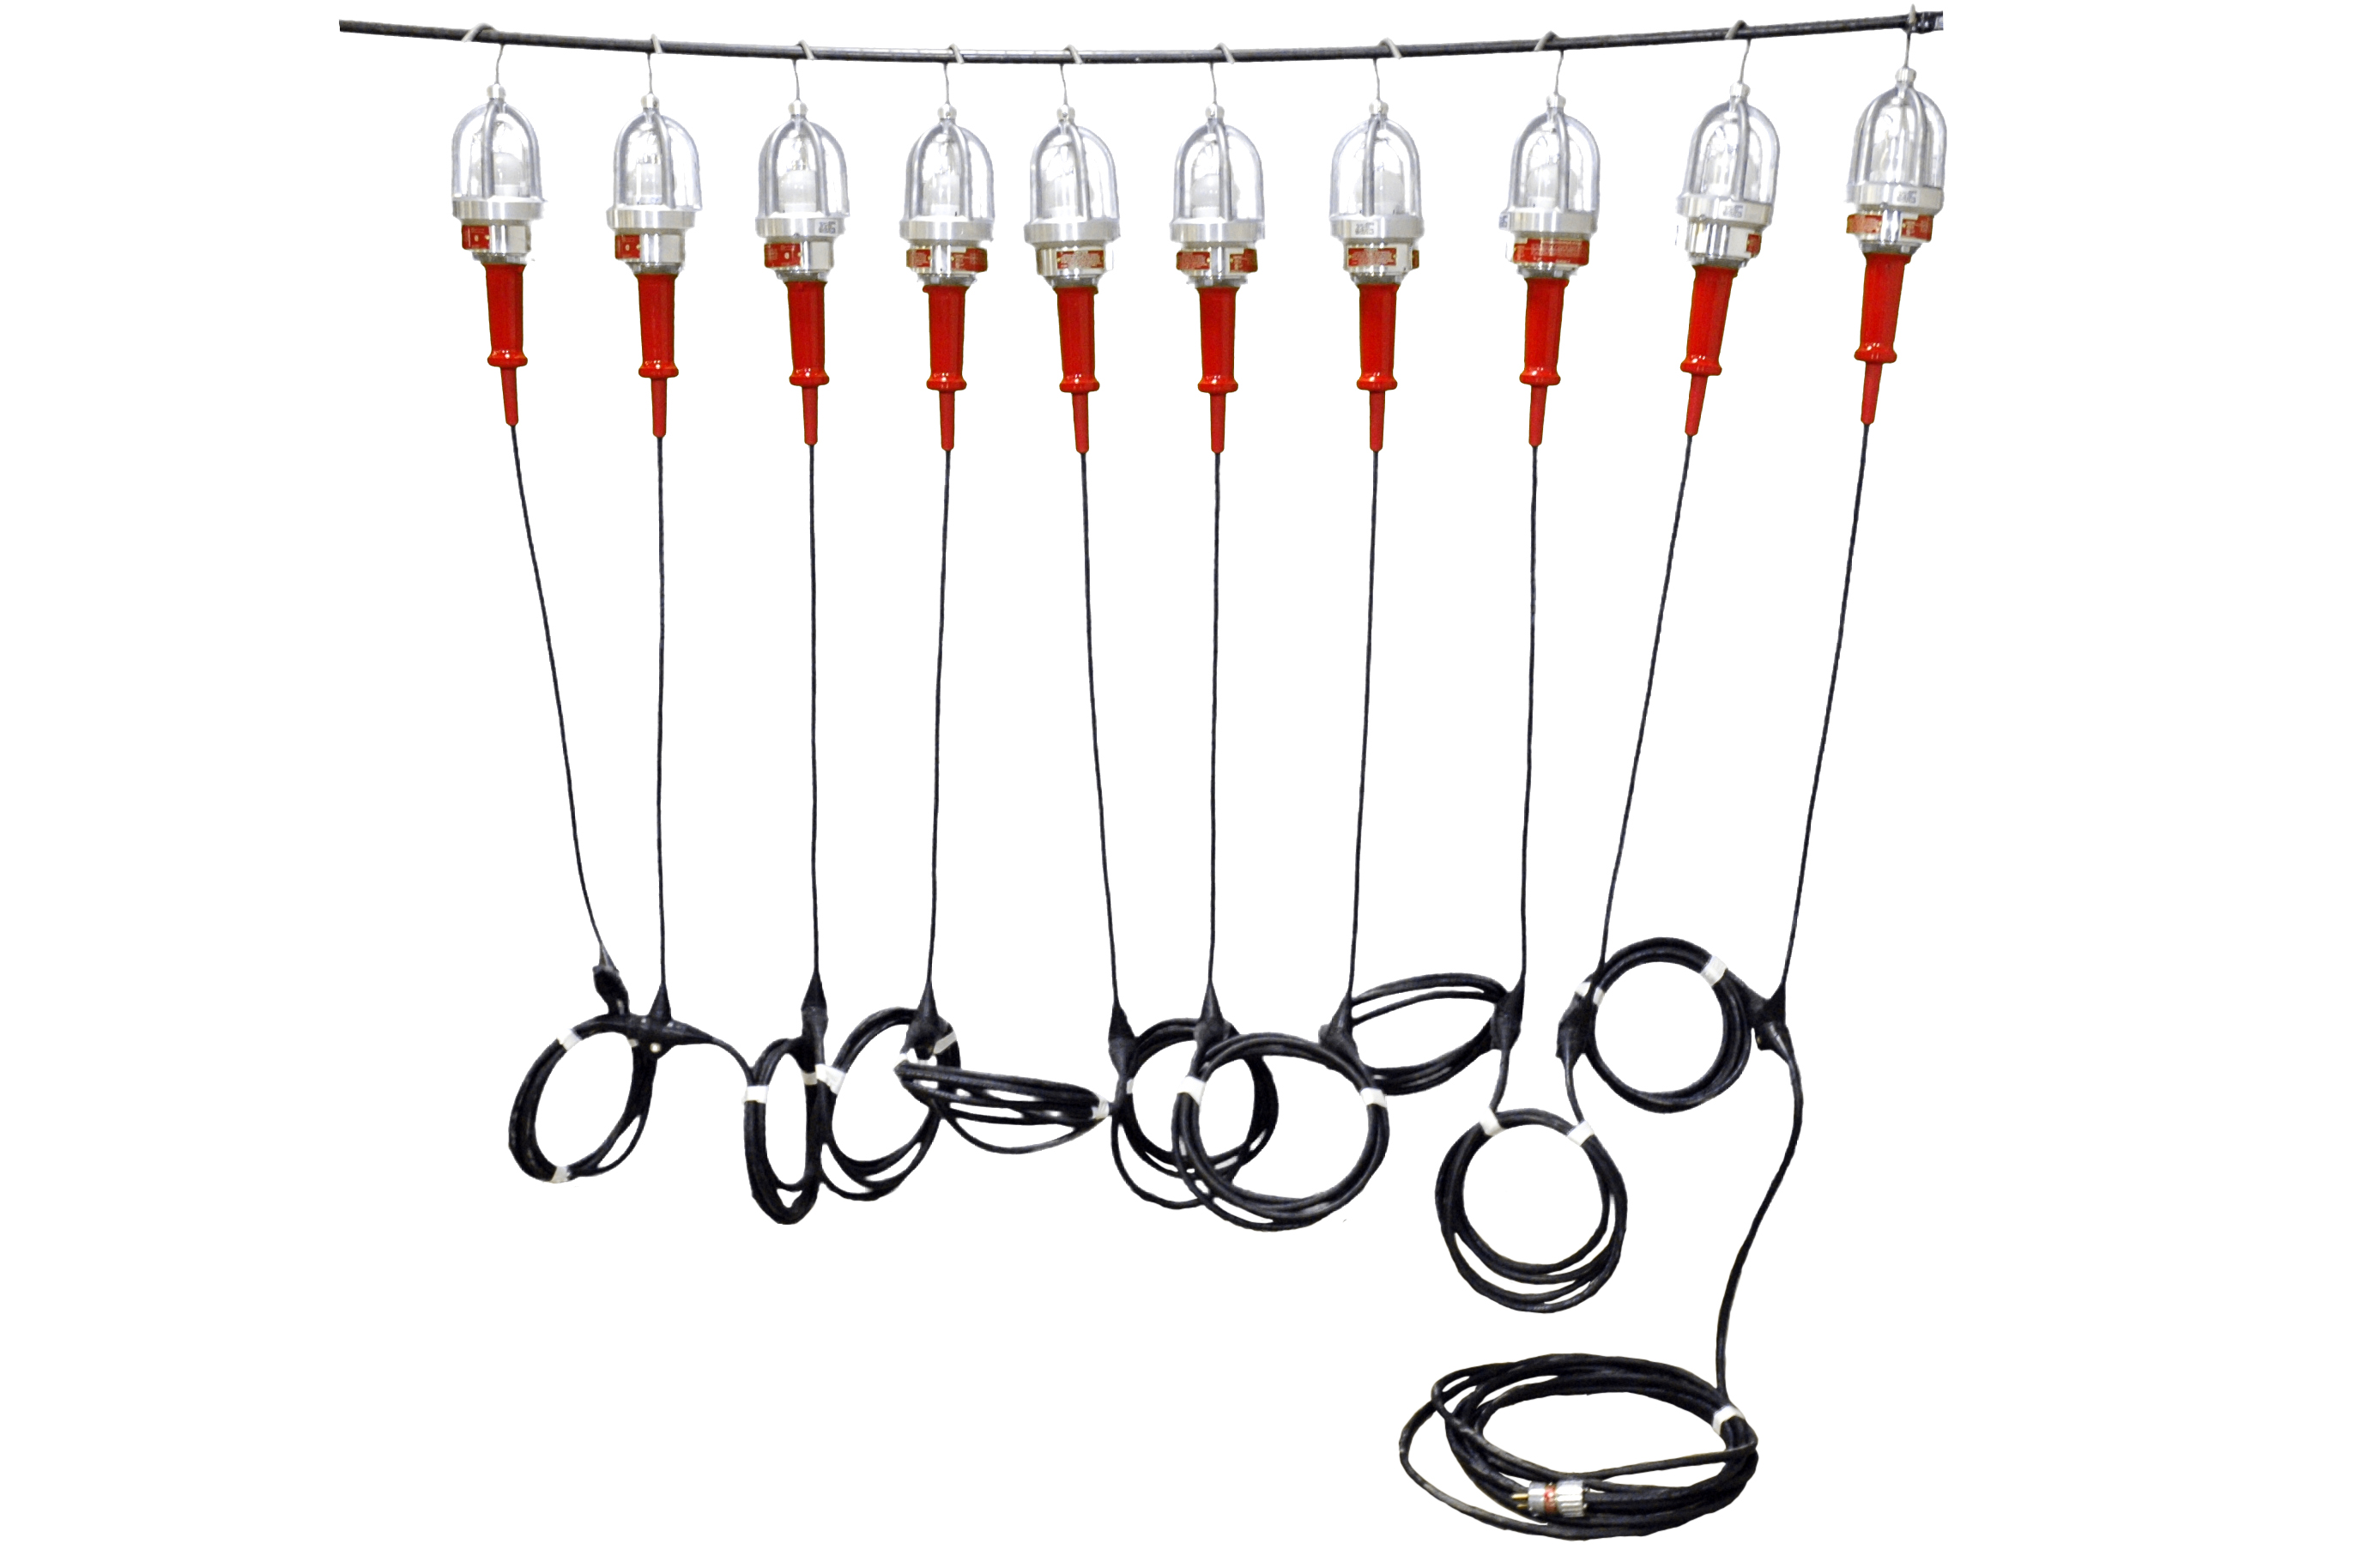 Class 1 & 2 Division 1 Explosion Proof String Lights for Hazardous Locations